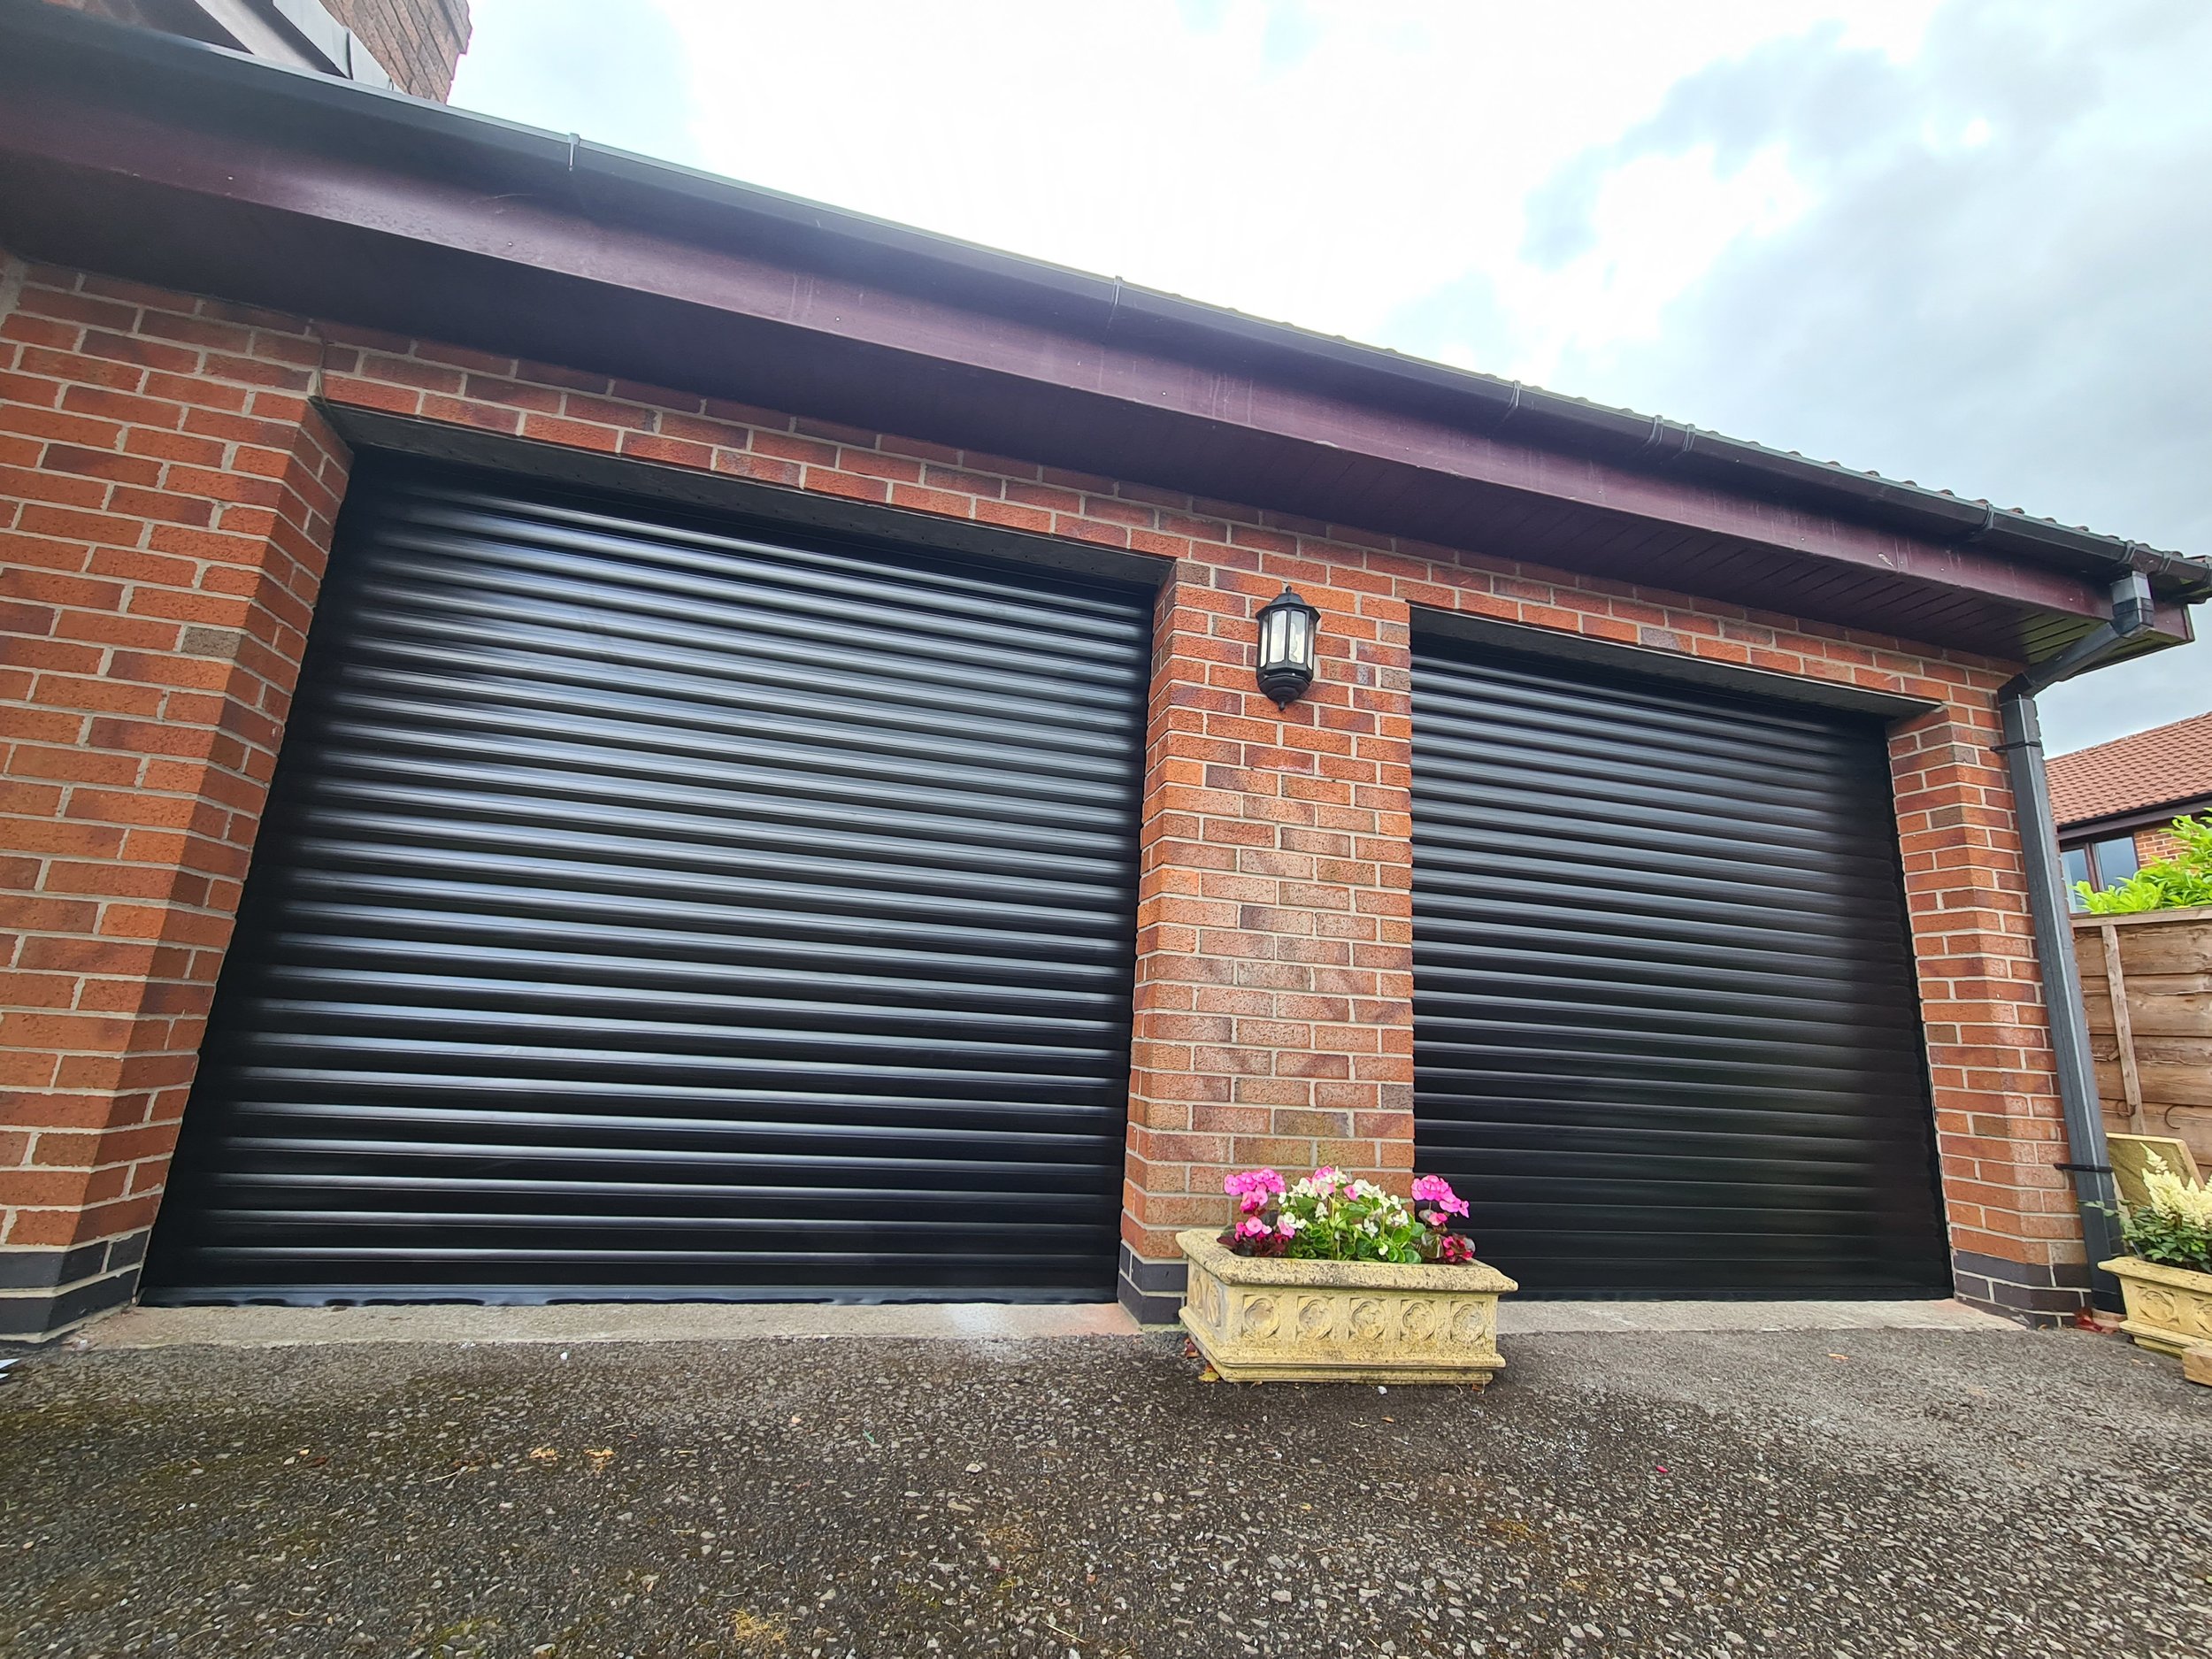 Uk Doors Midlands Classic 77m fully insulated roller garage door in smooth Black W/ matching frame